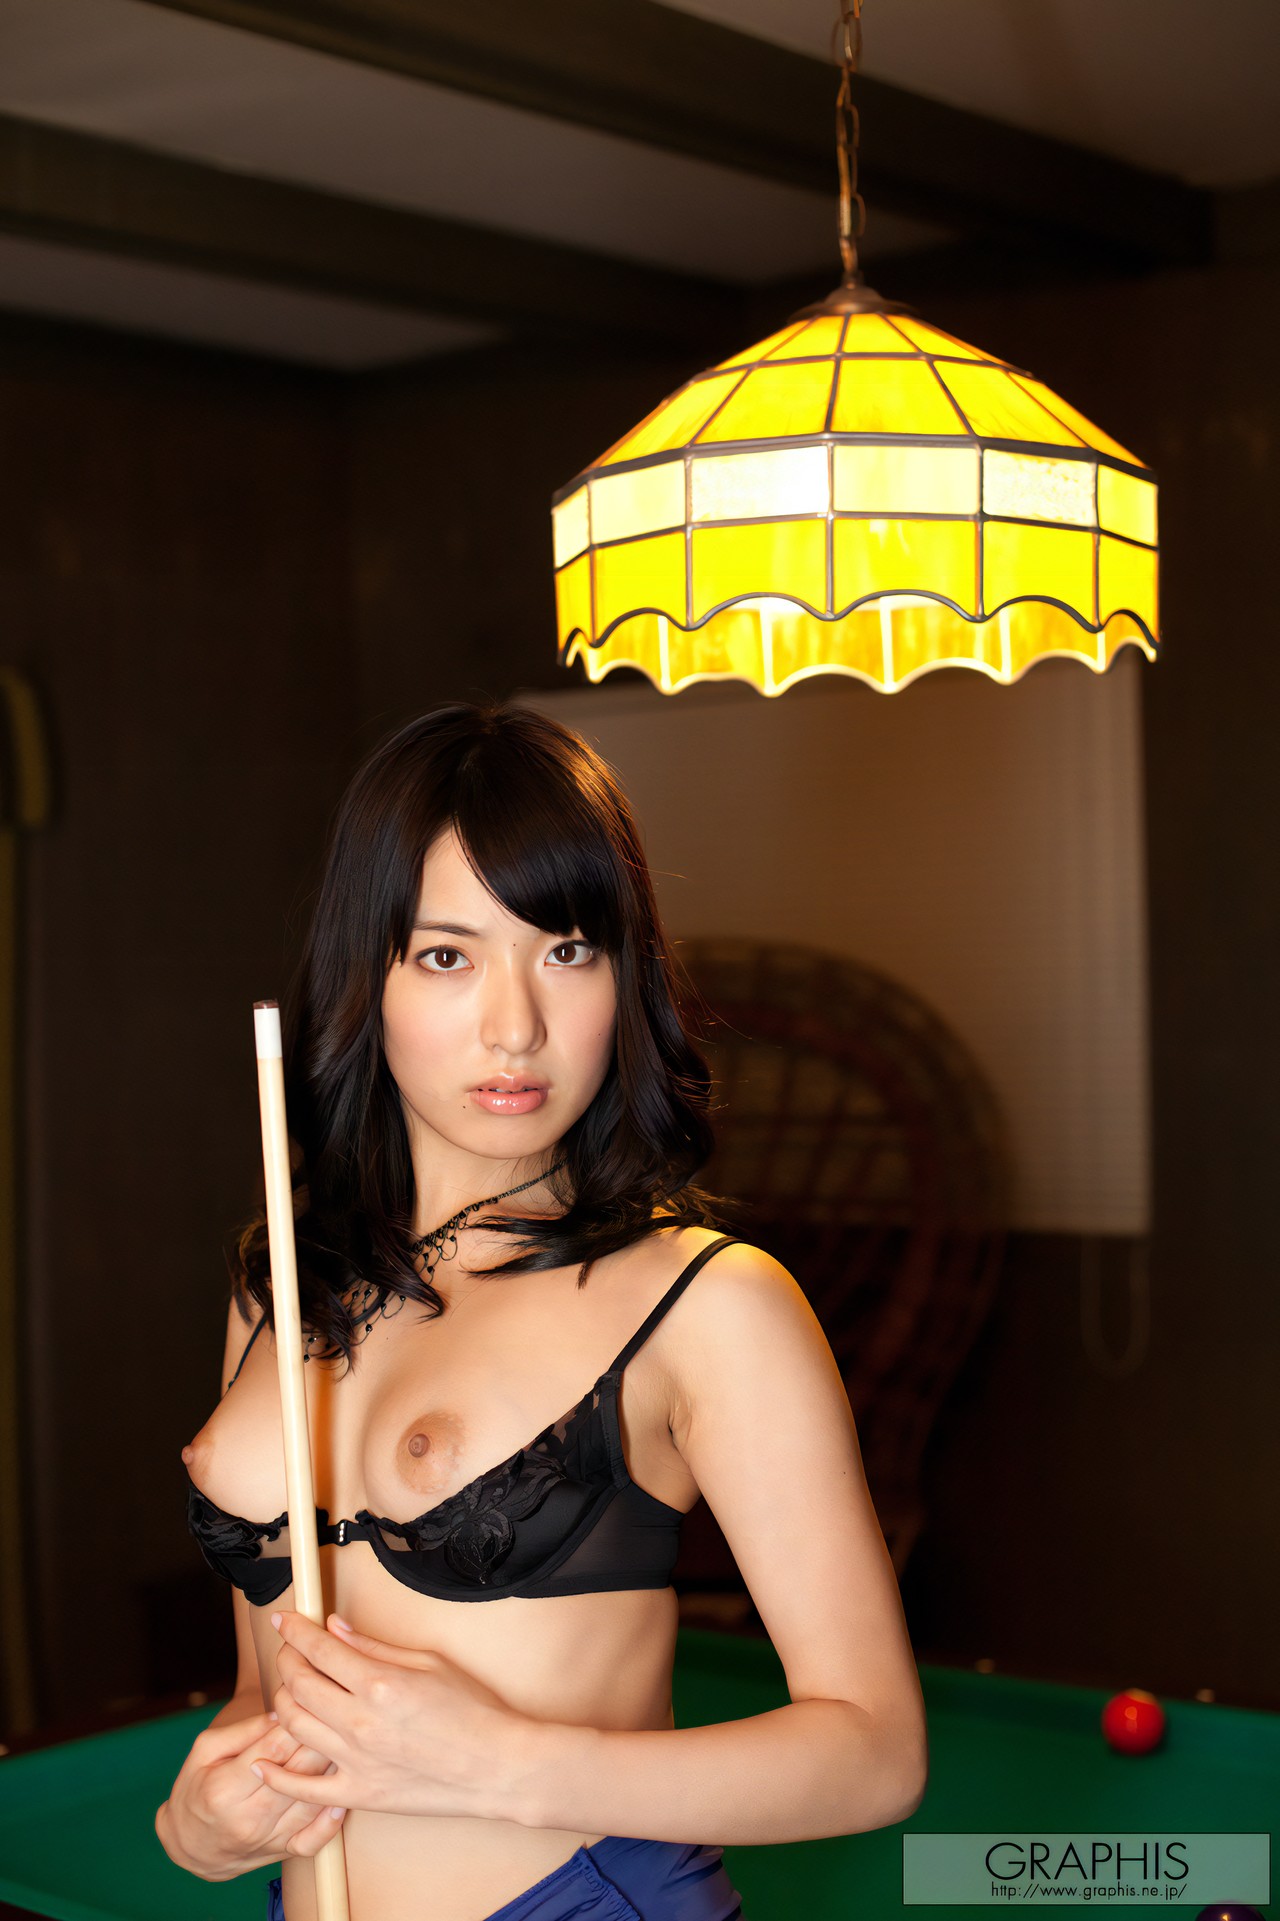 Kana Yume 由愛可奈, Graphis Special Contents [Further Growth] Vol.02